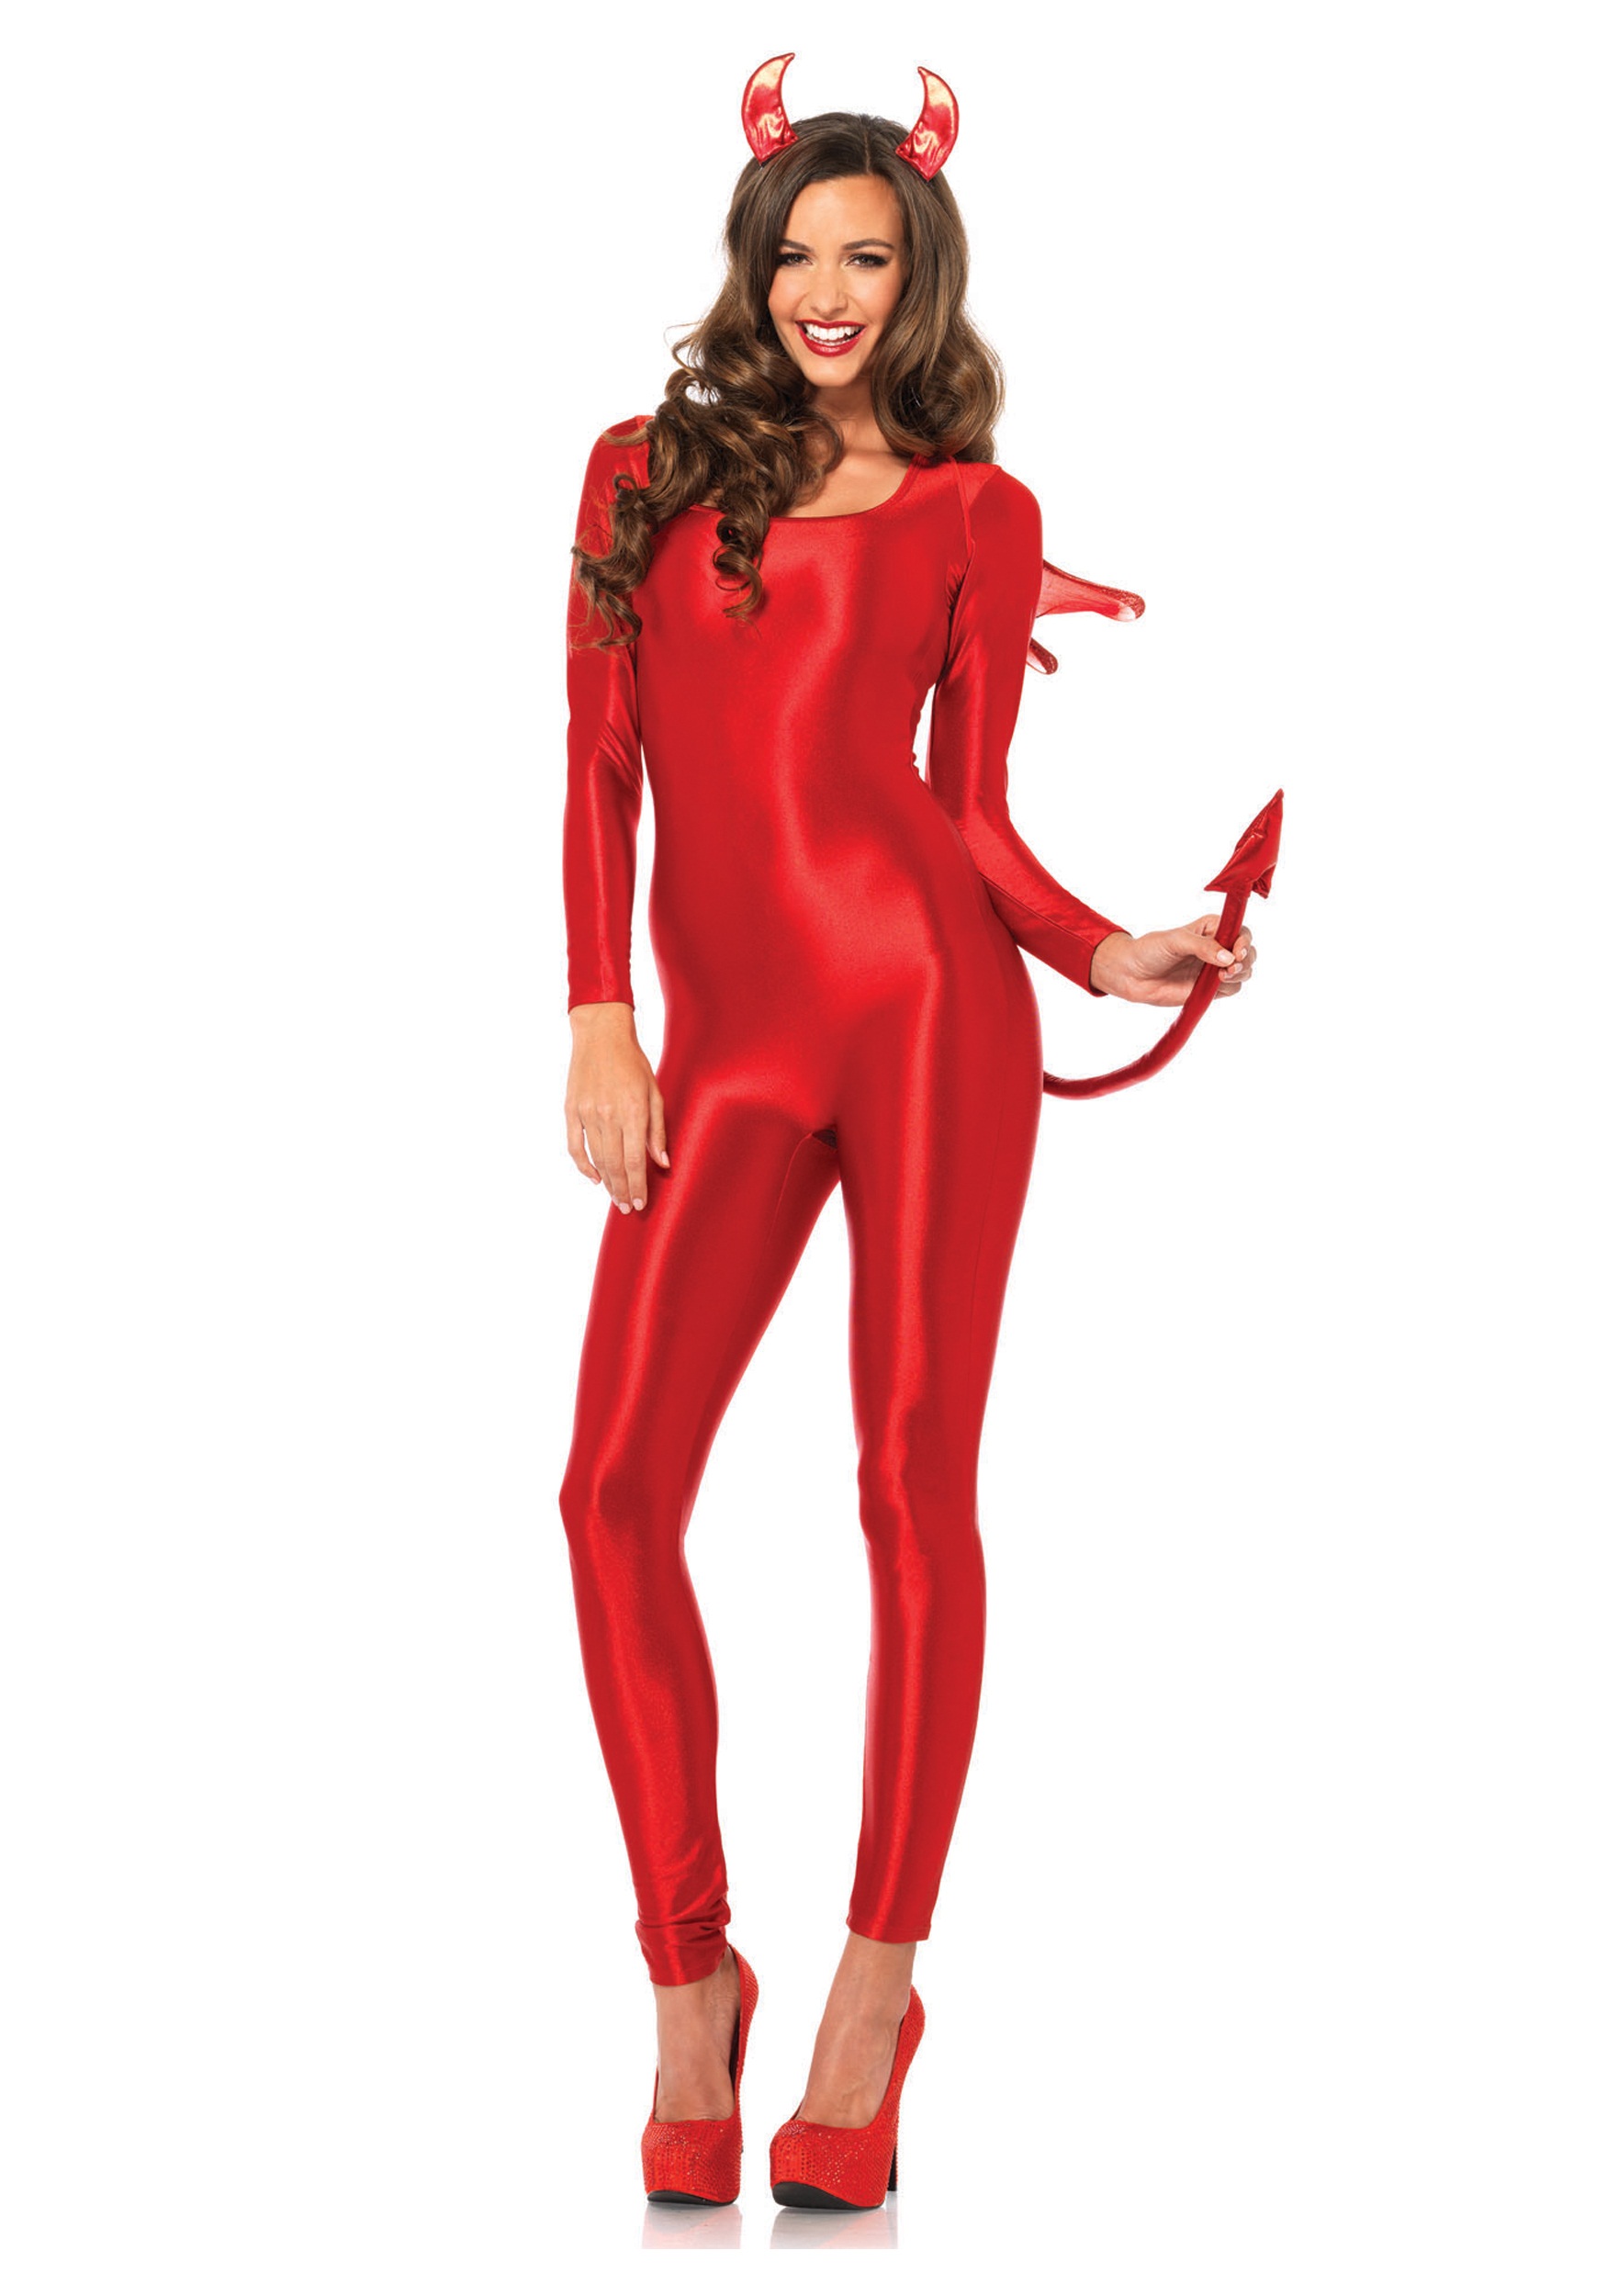 Red Spandex Catsuit Fancy Dress Costume